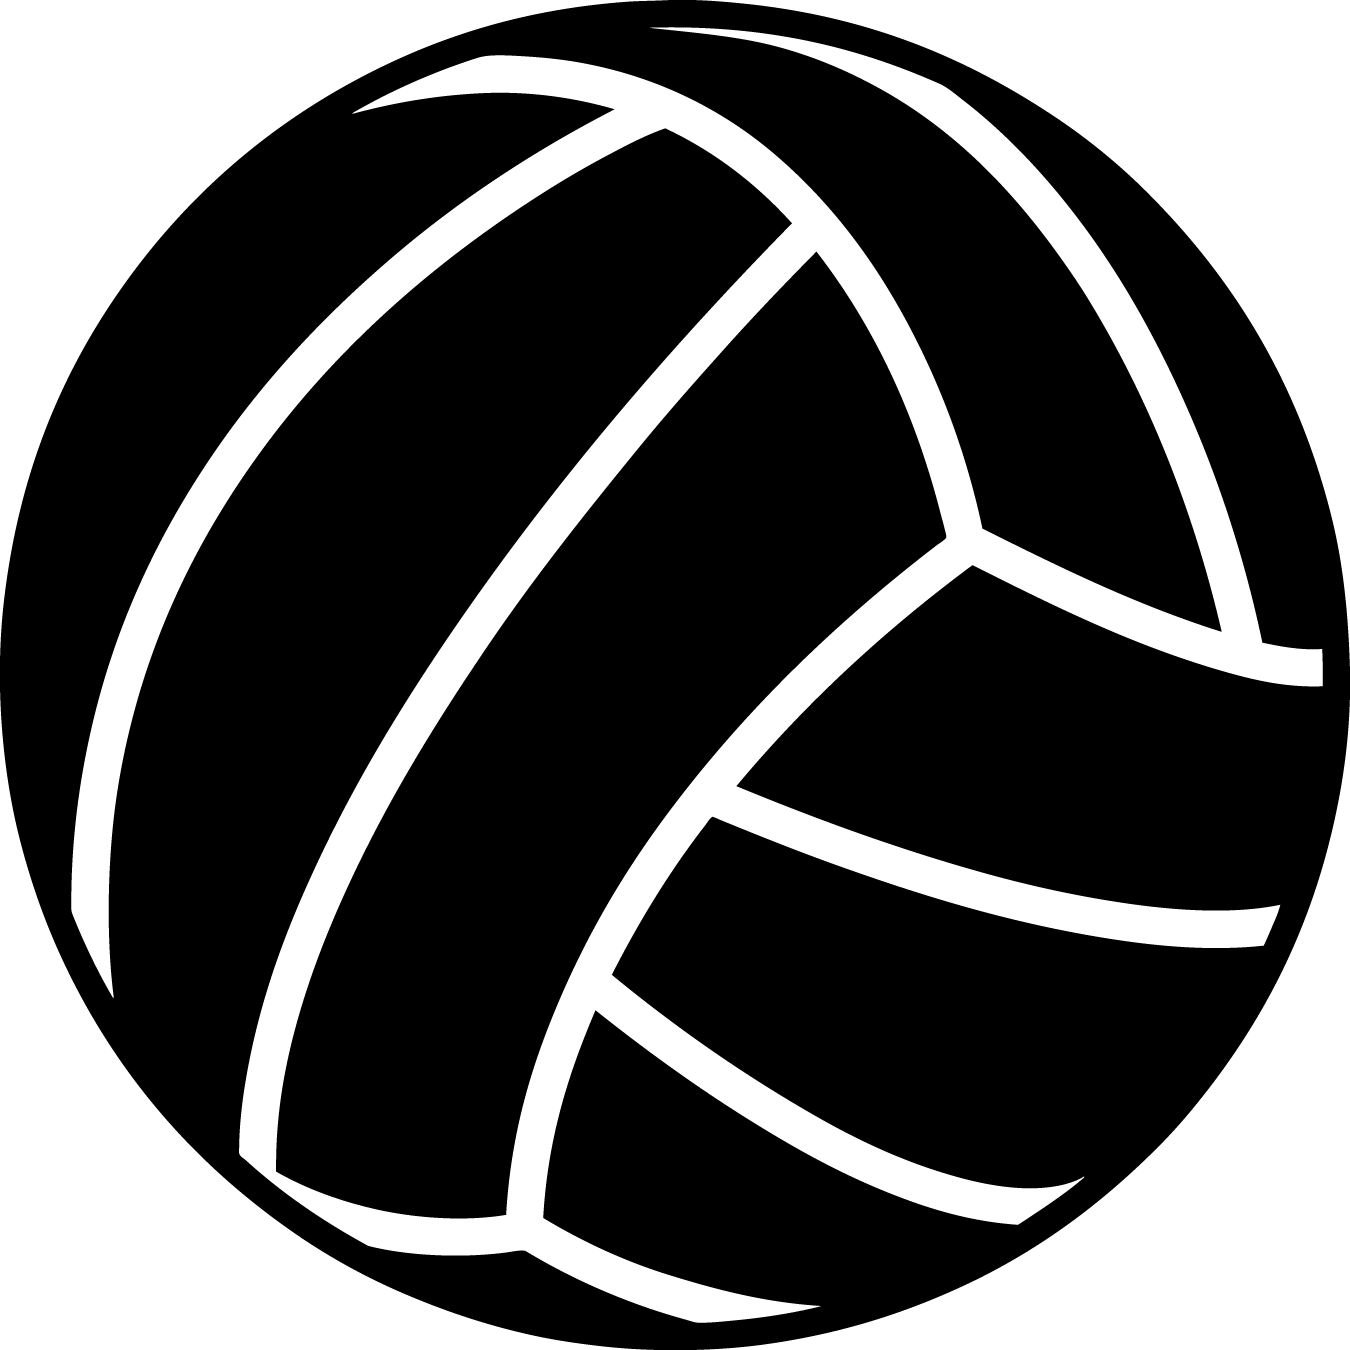 Volleyball outline clipart